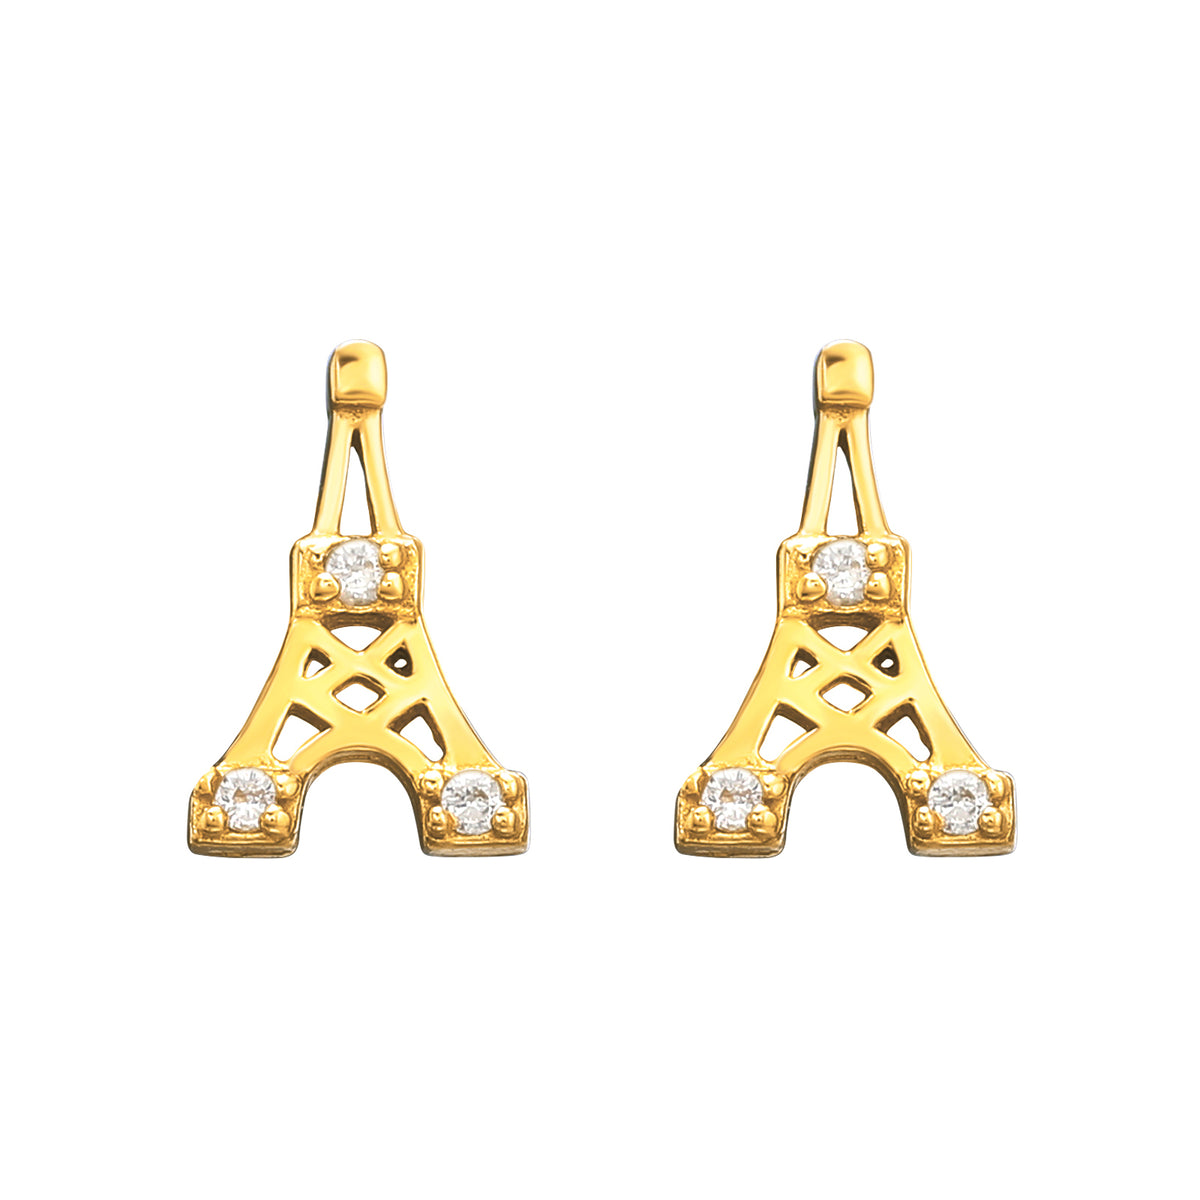 Mon Paris silver earrings, gold plated